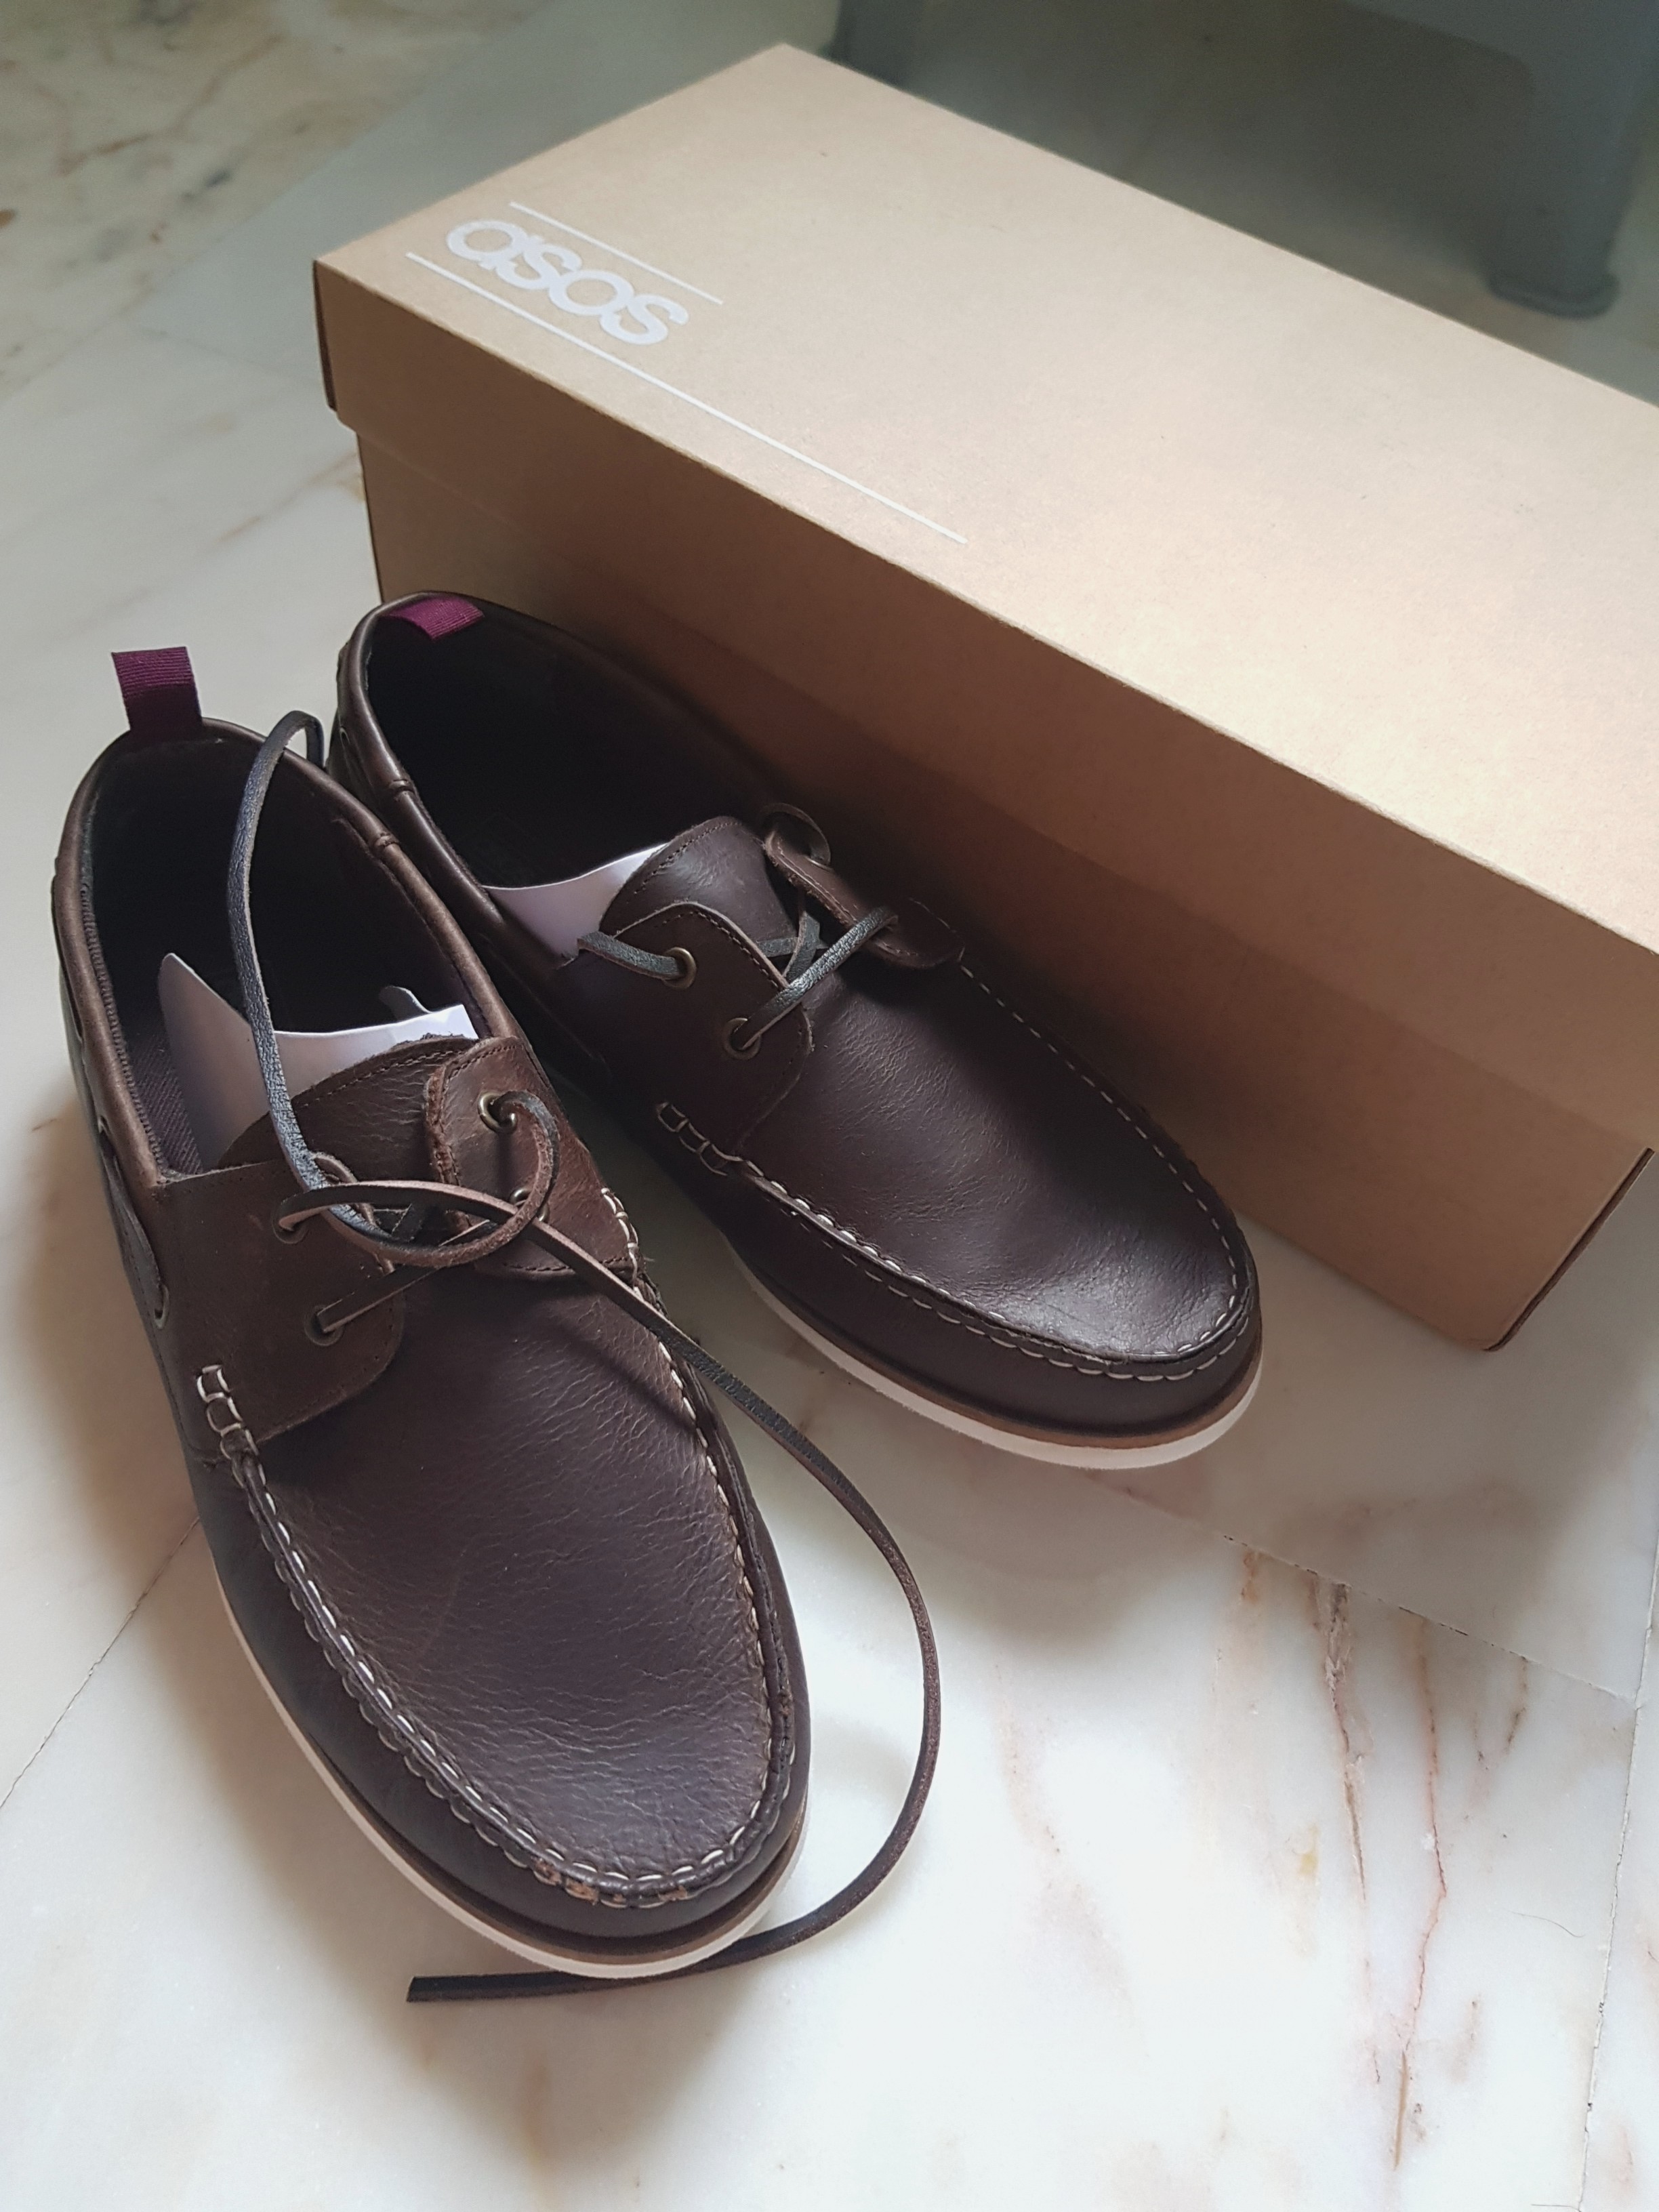 BNIB ASOS Boat Shoes (brown leather 